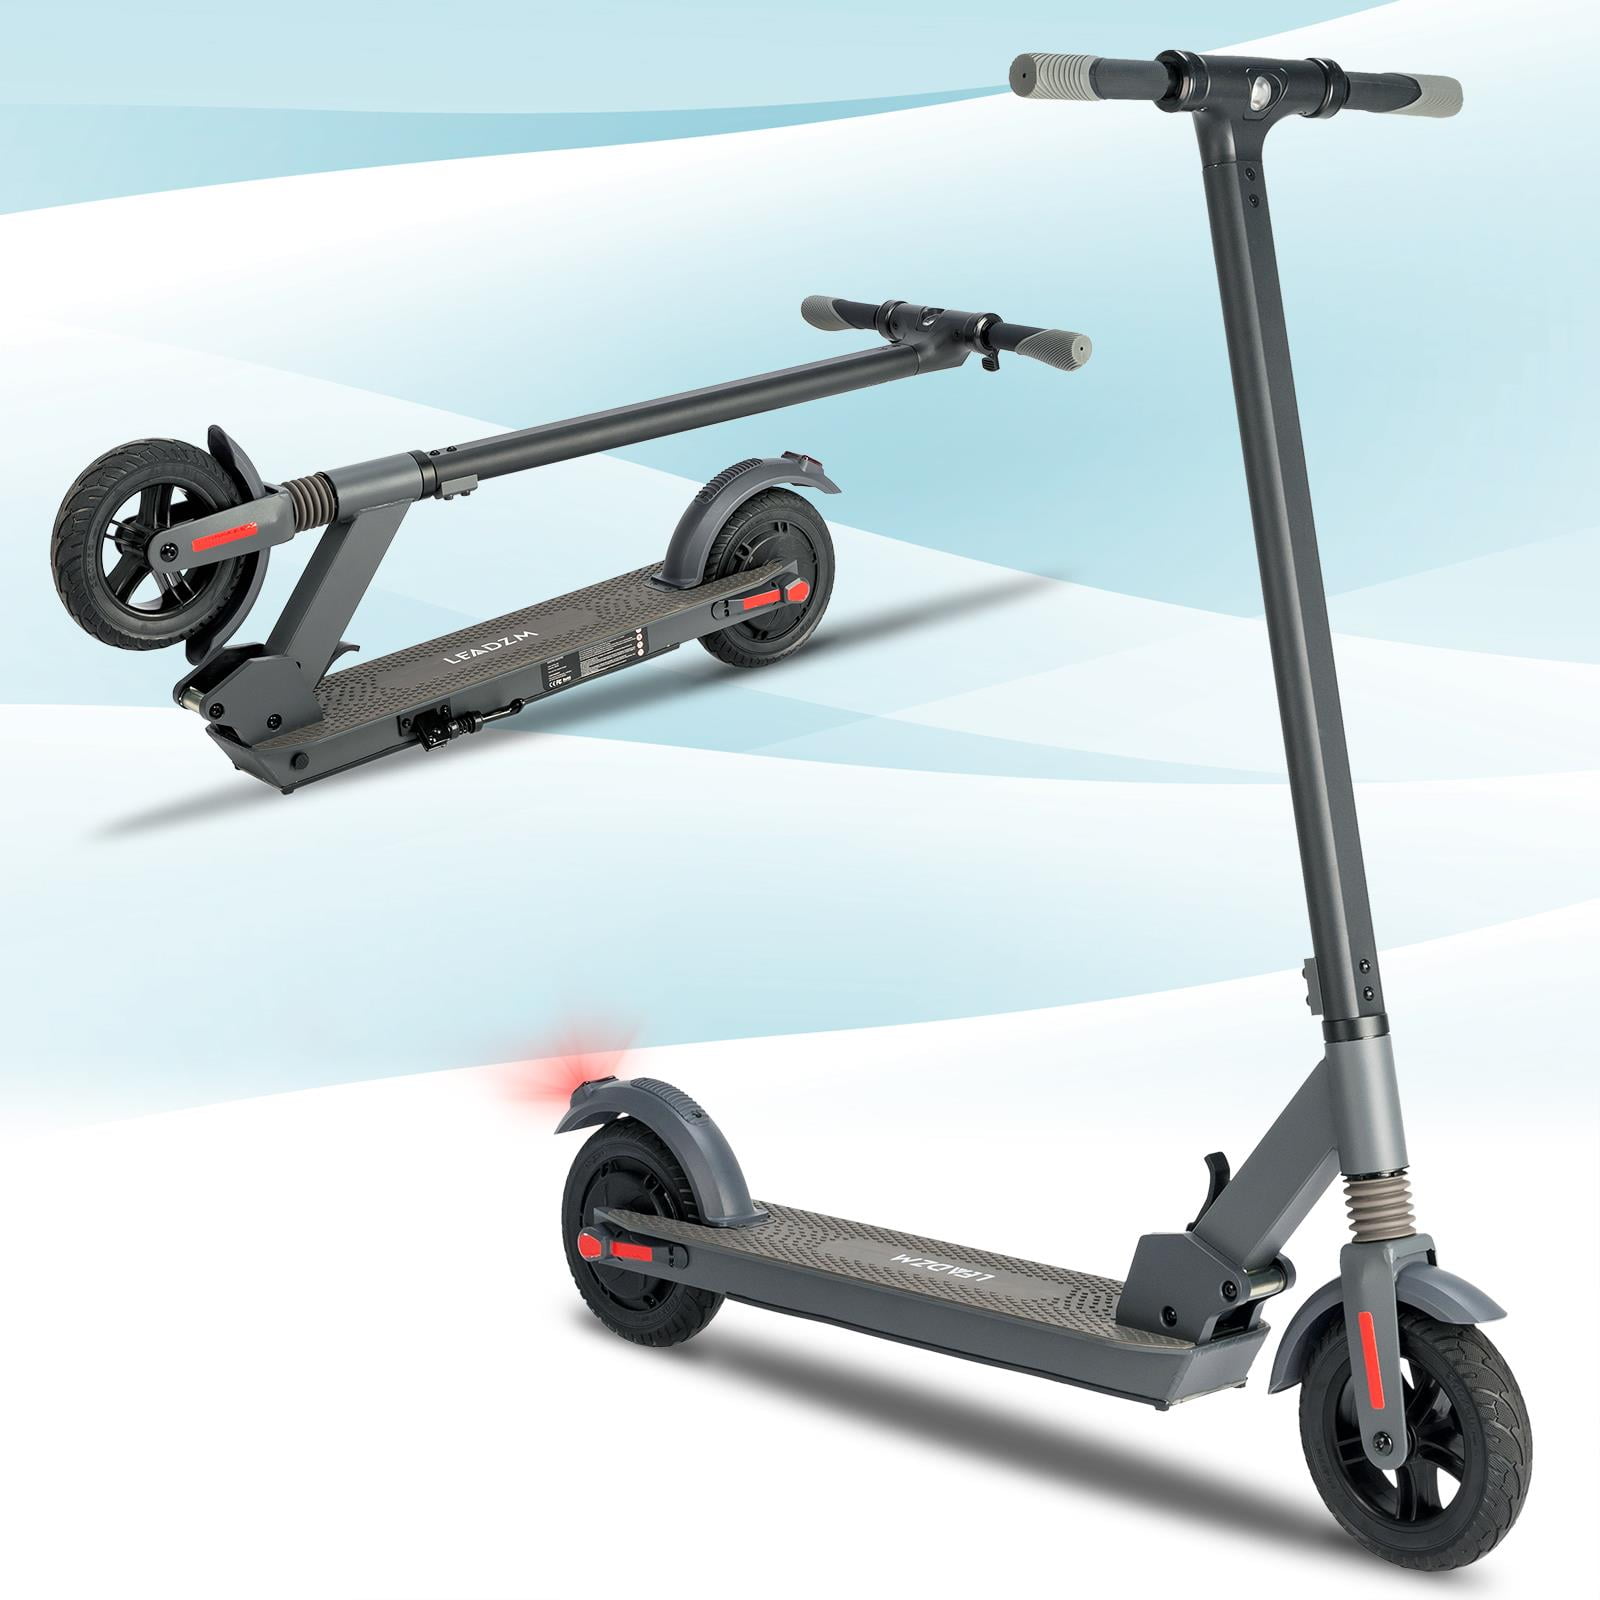 Scooter Top Speed Electric Max solid 12-15.5 Adults Scooter 220lbs,8\' Anti-skid Tire,15.5 Ktaxon mph Miles for Commuter Long Urban Range Load Folding inch